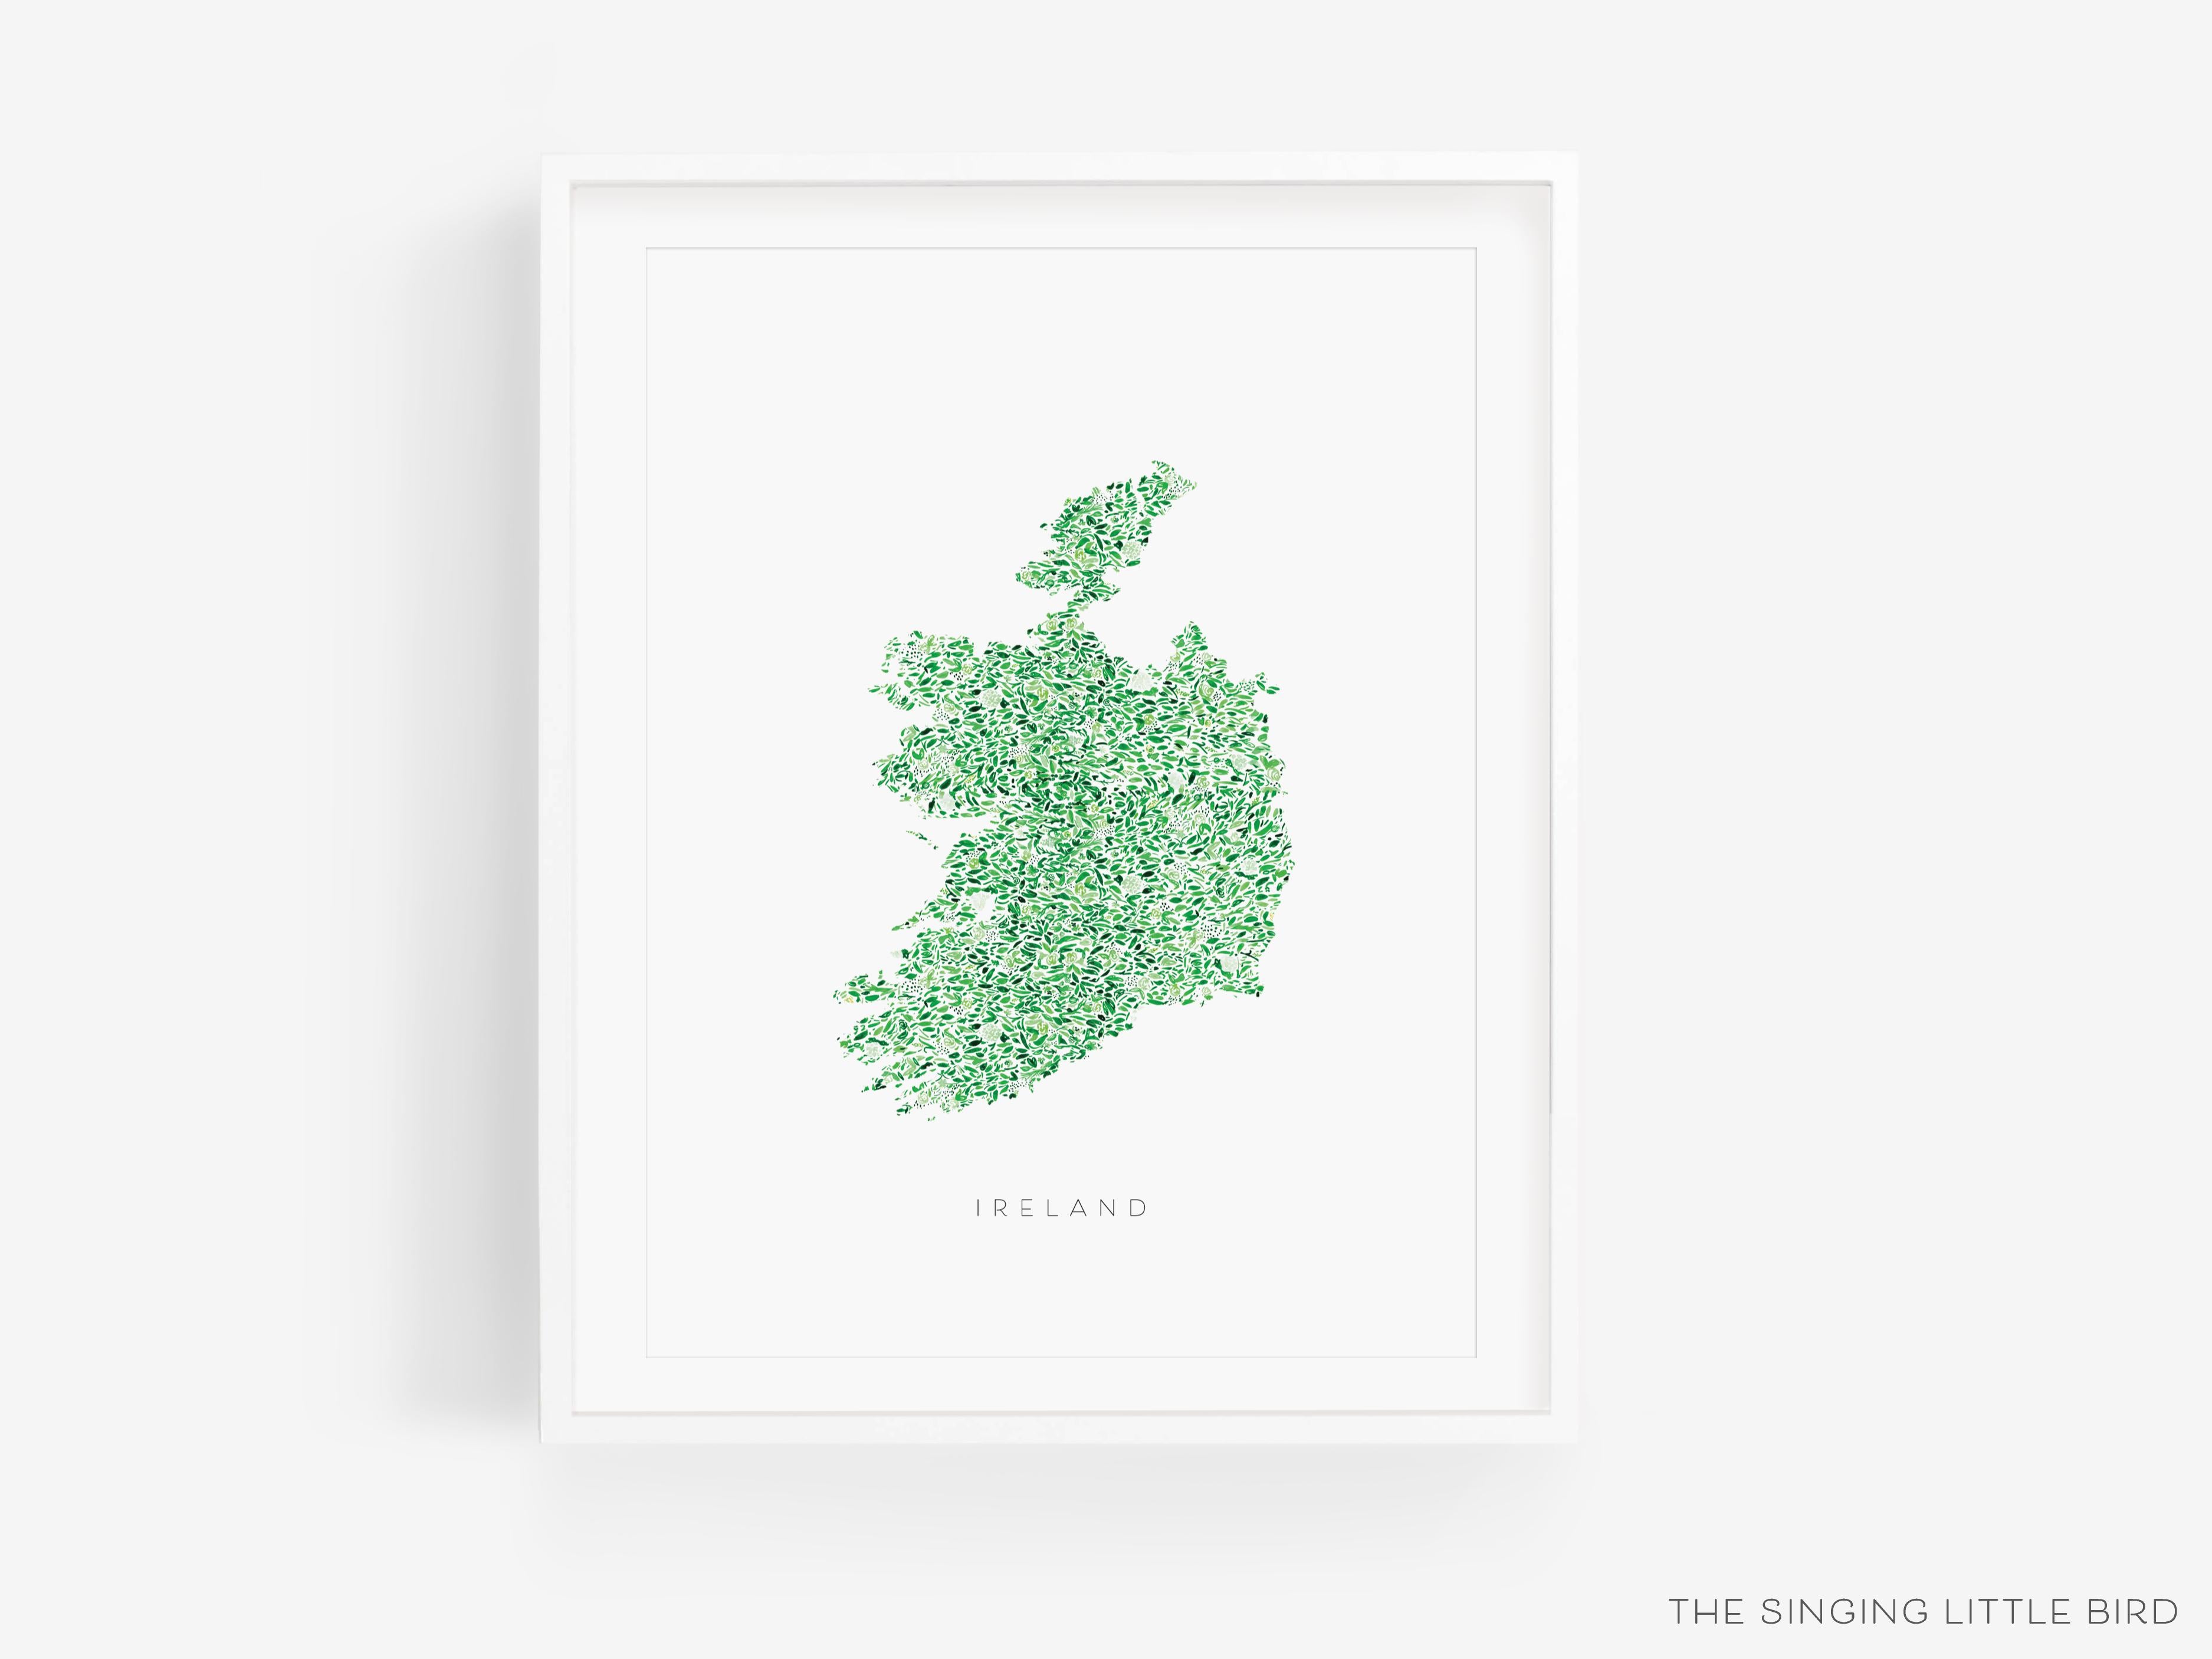 Ireland Art Print with Text-This watercolor art print features our hand-painted floral pattern in the shape of Ireland, printed in the USA on 120lb high quality art paper. This makes a great gift or wall decor for the Irish lover in your life.-The Singing Little Bird